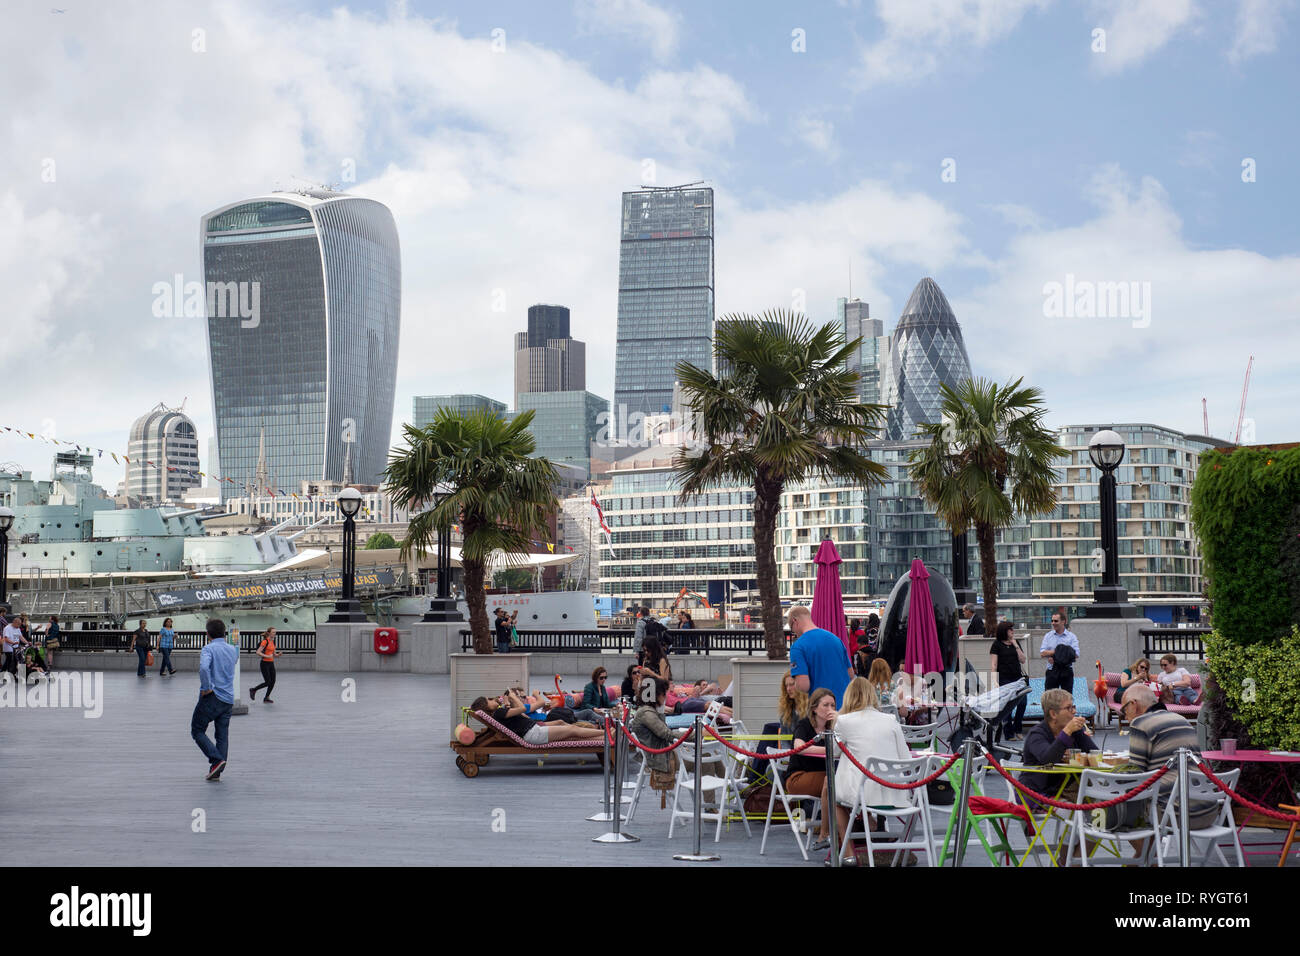 london riviera beside the river thames in the summer Stock Photo